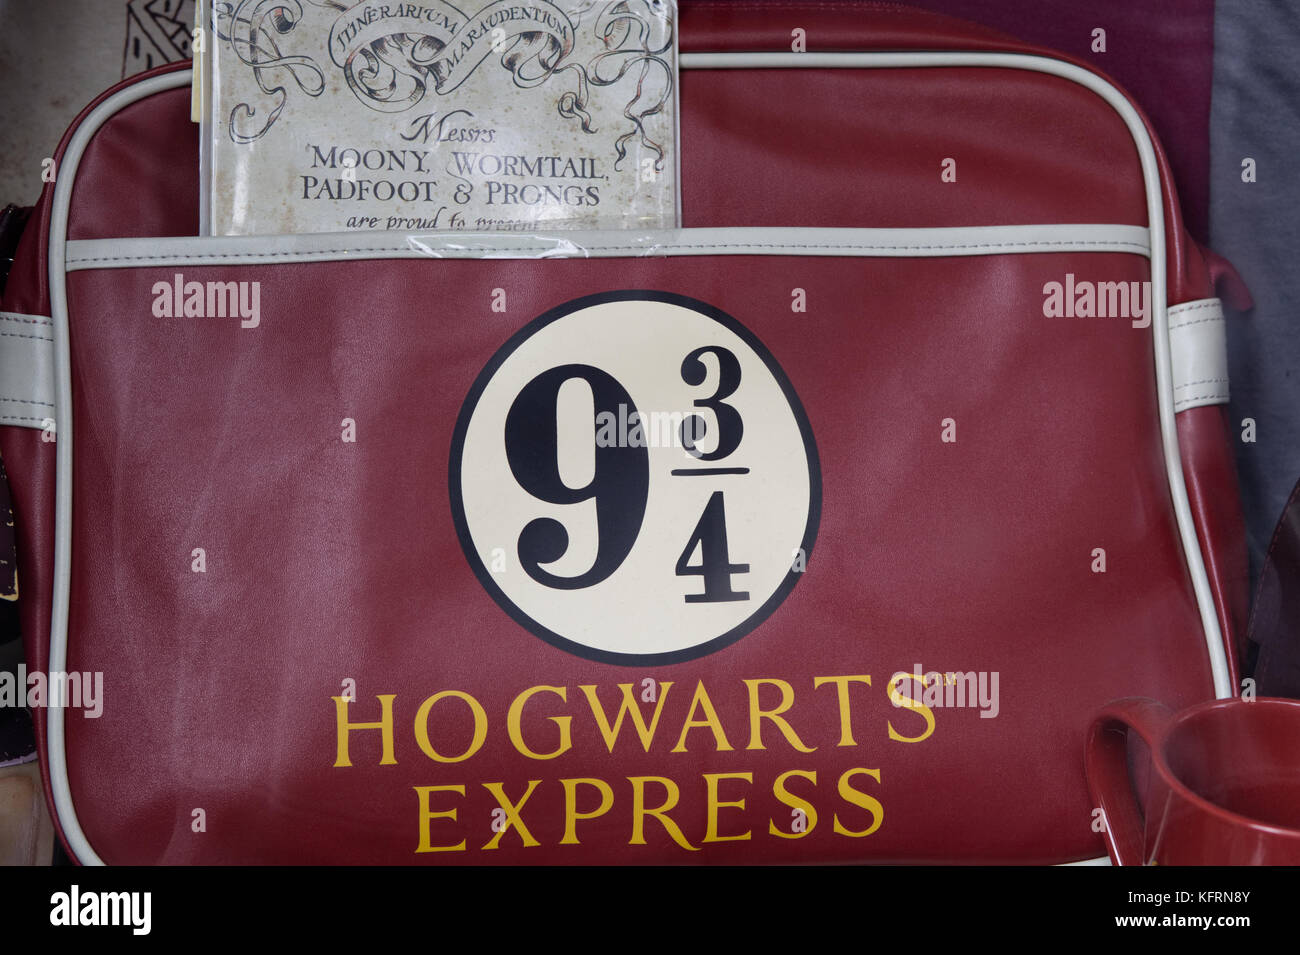 Moony wormtail padfoot and prongs book with a 9 3/4 hogwarts express satchel Stock Photo